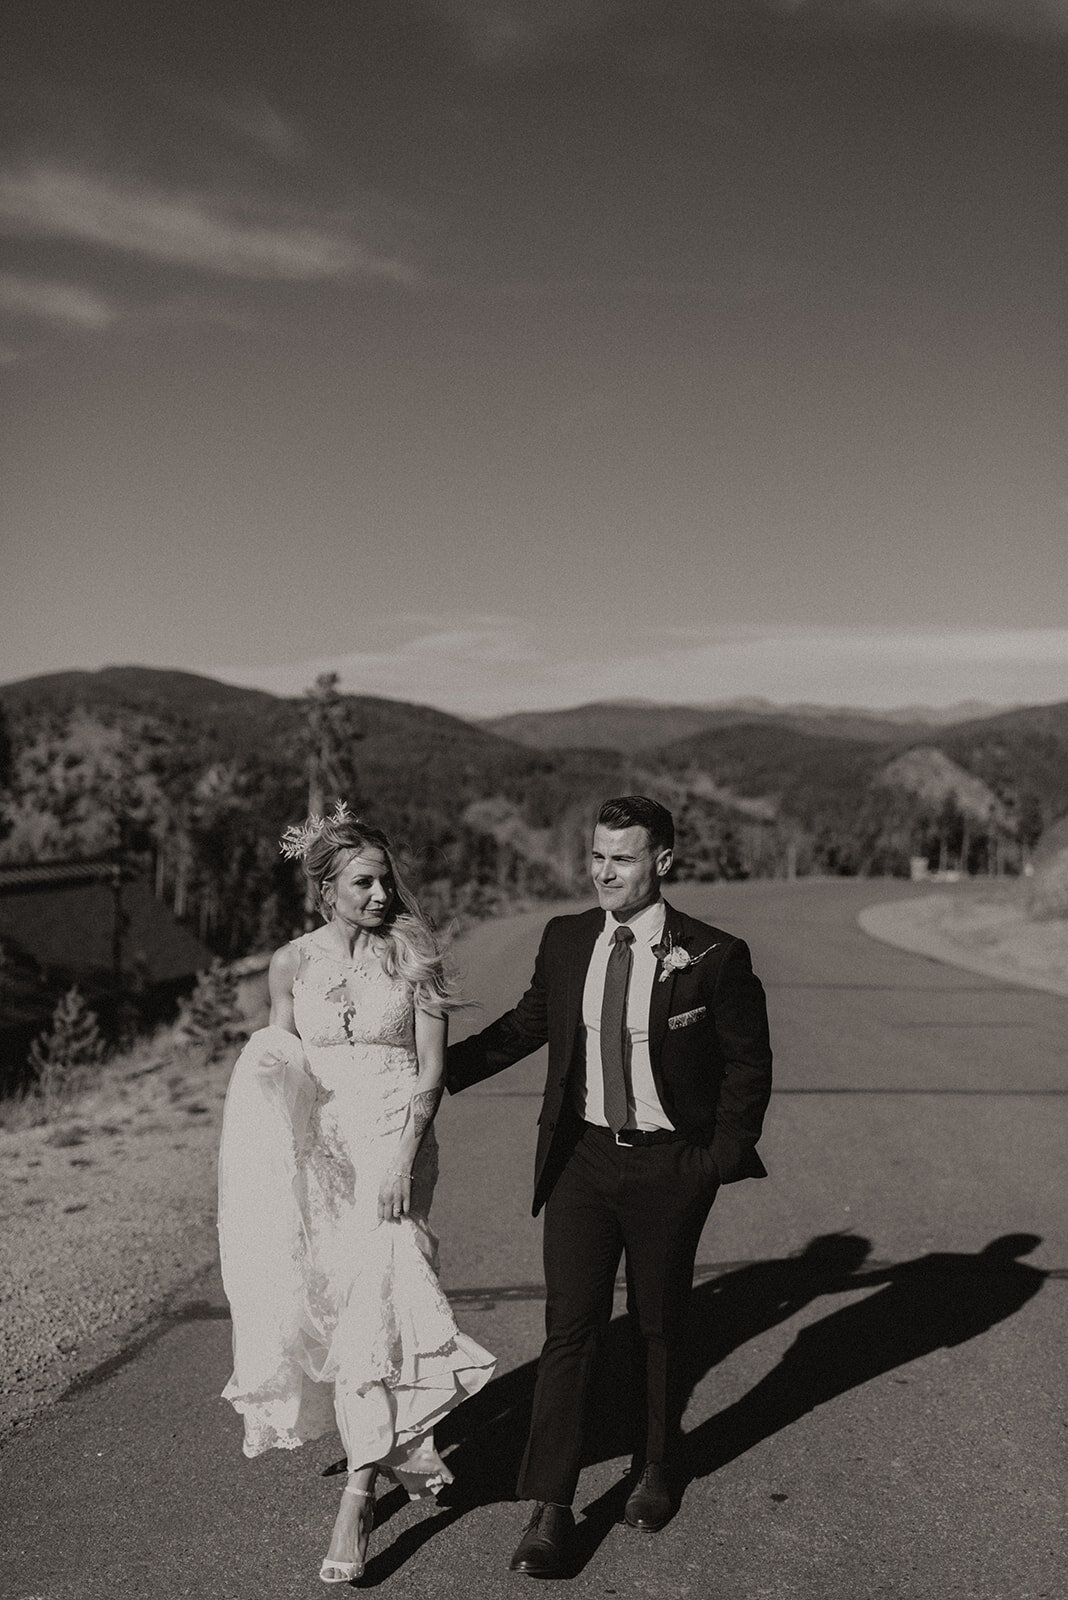 Urban Eclectic Couple Portraits | Intimate Mountain Wedding | Wildly Collective | Kate + Alex